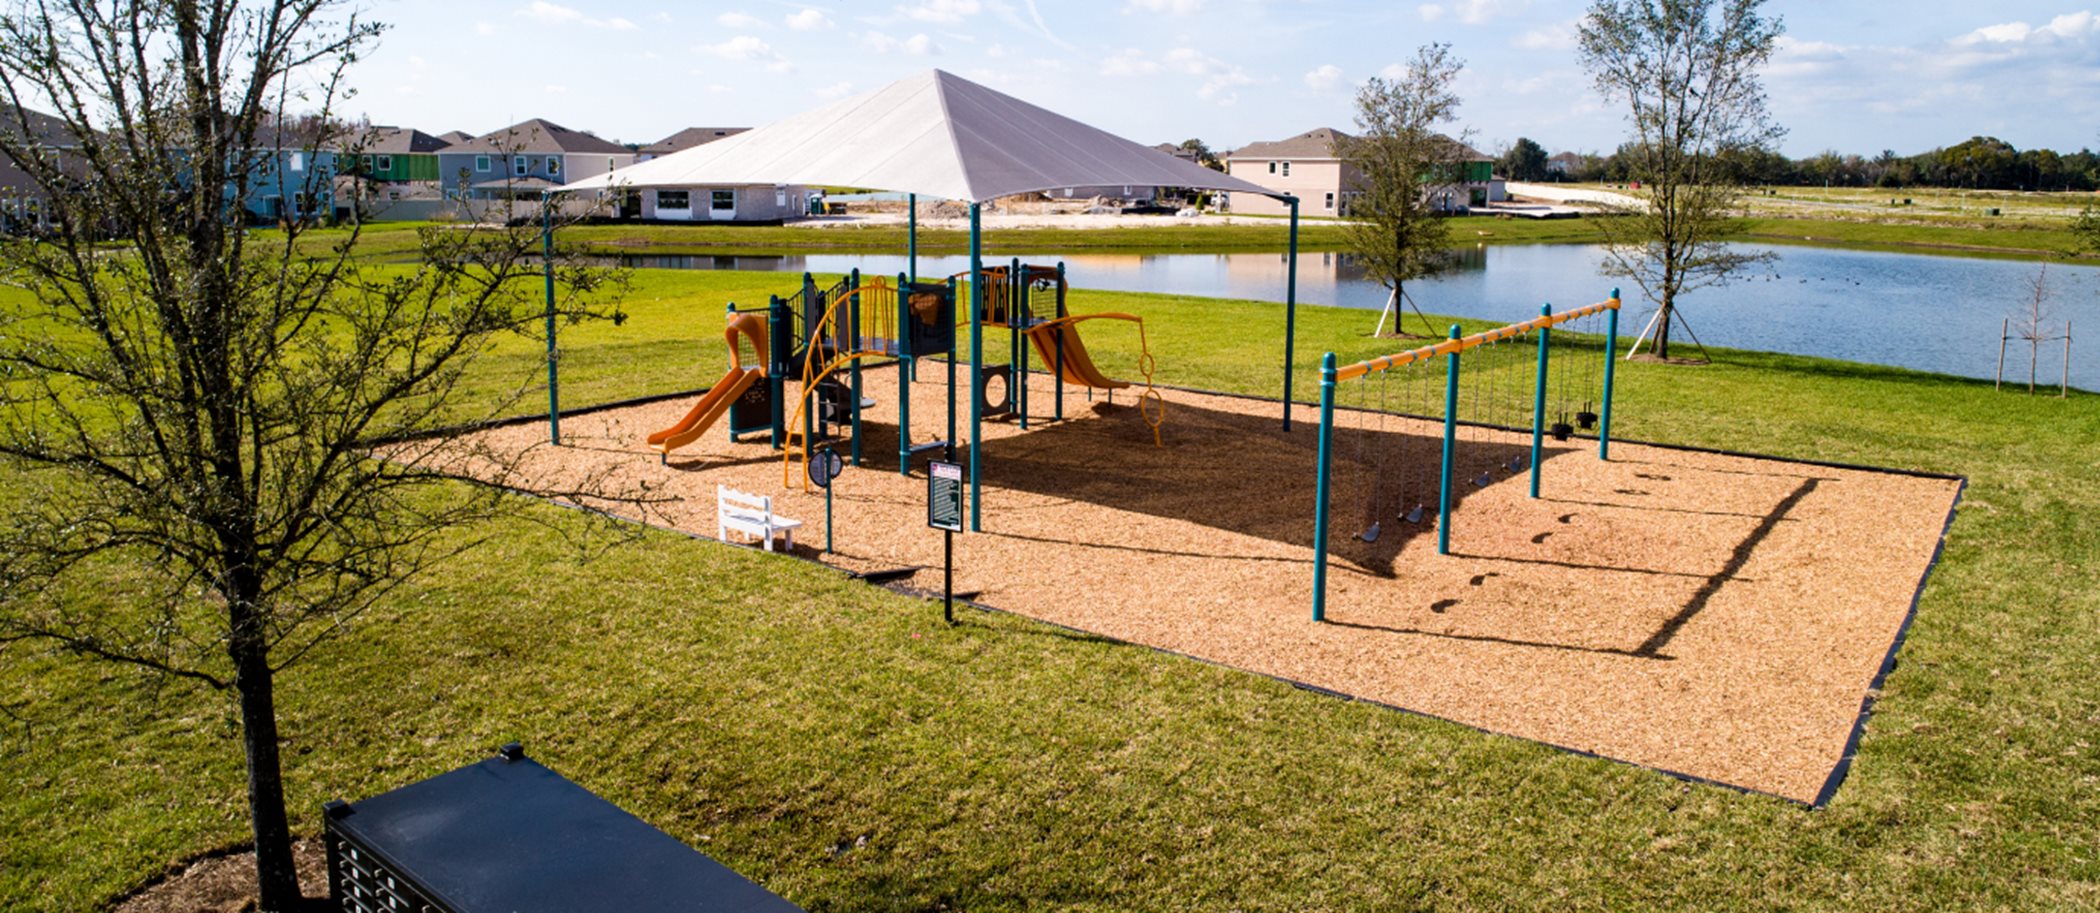 Epperson The Manors Play Area